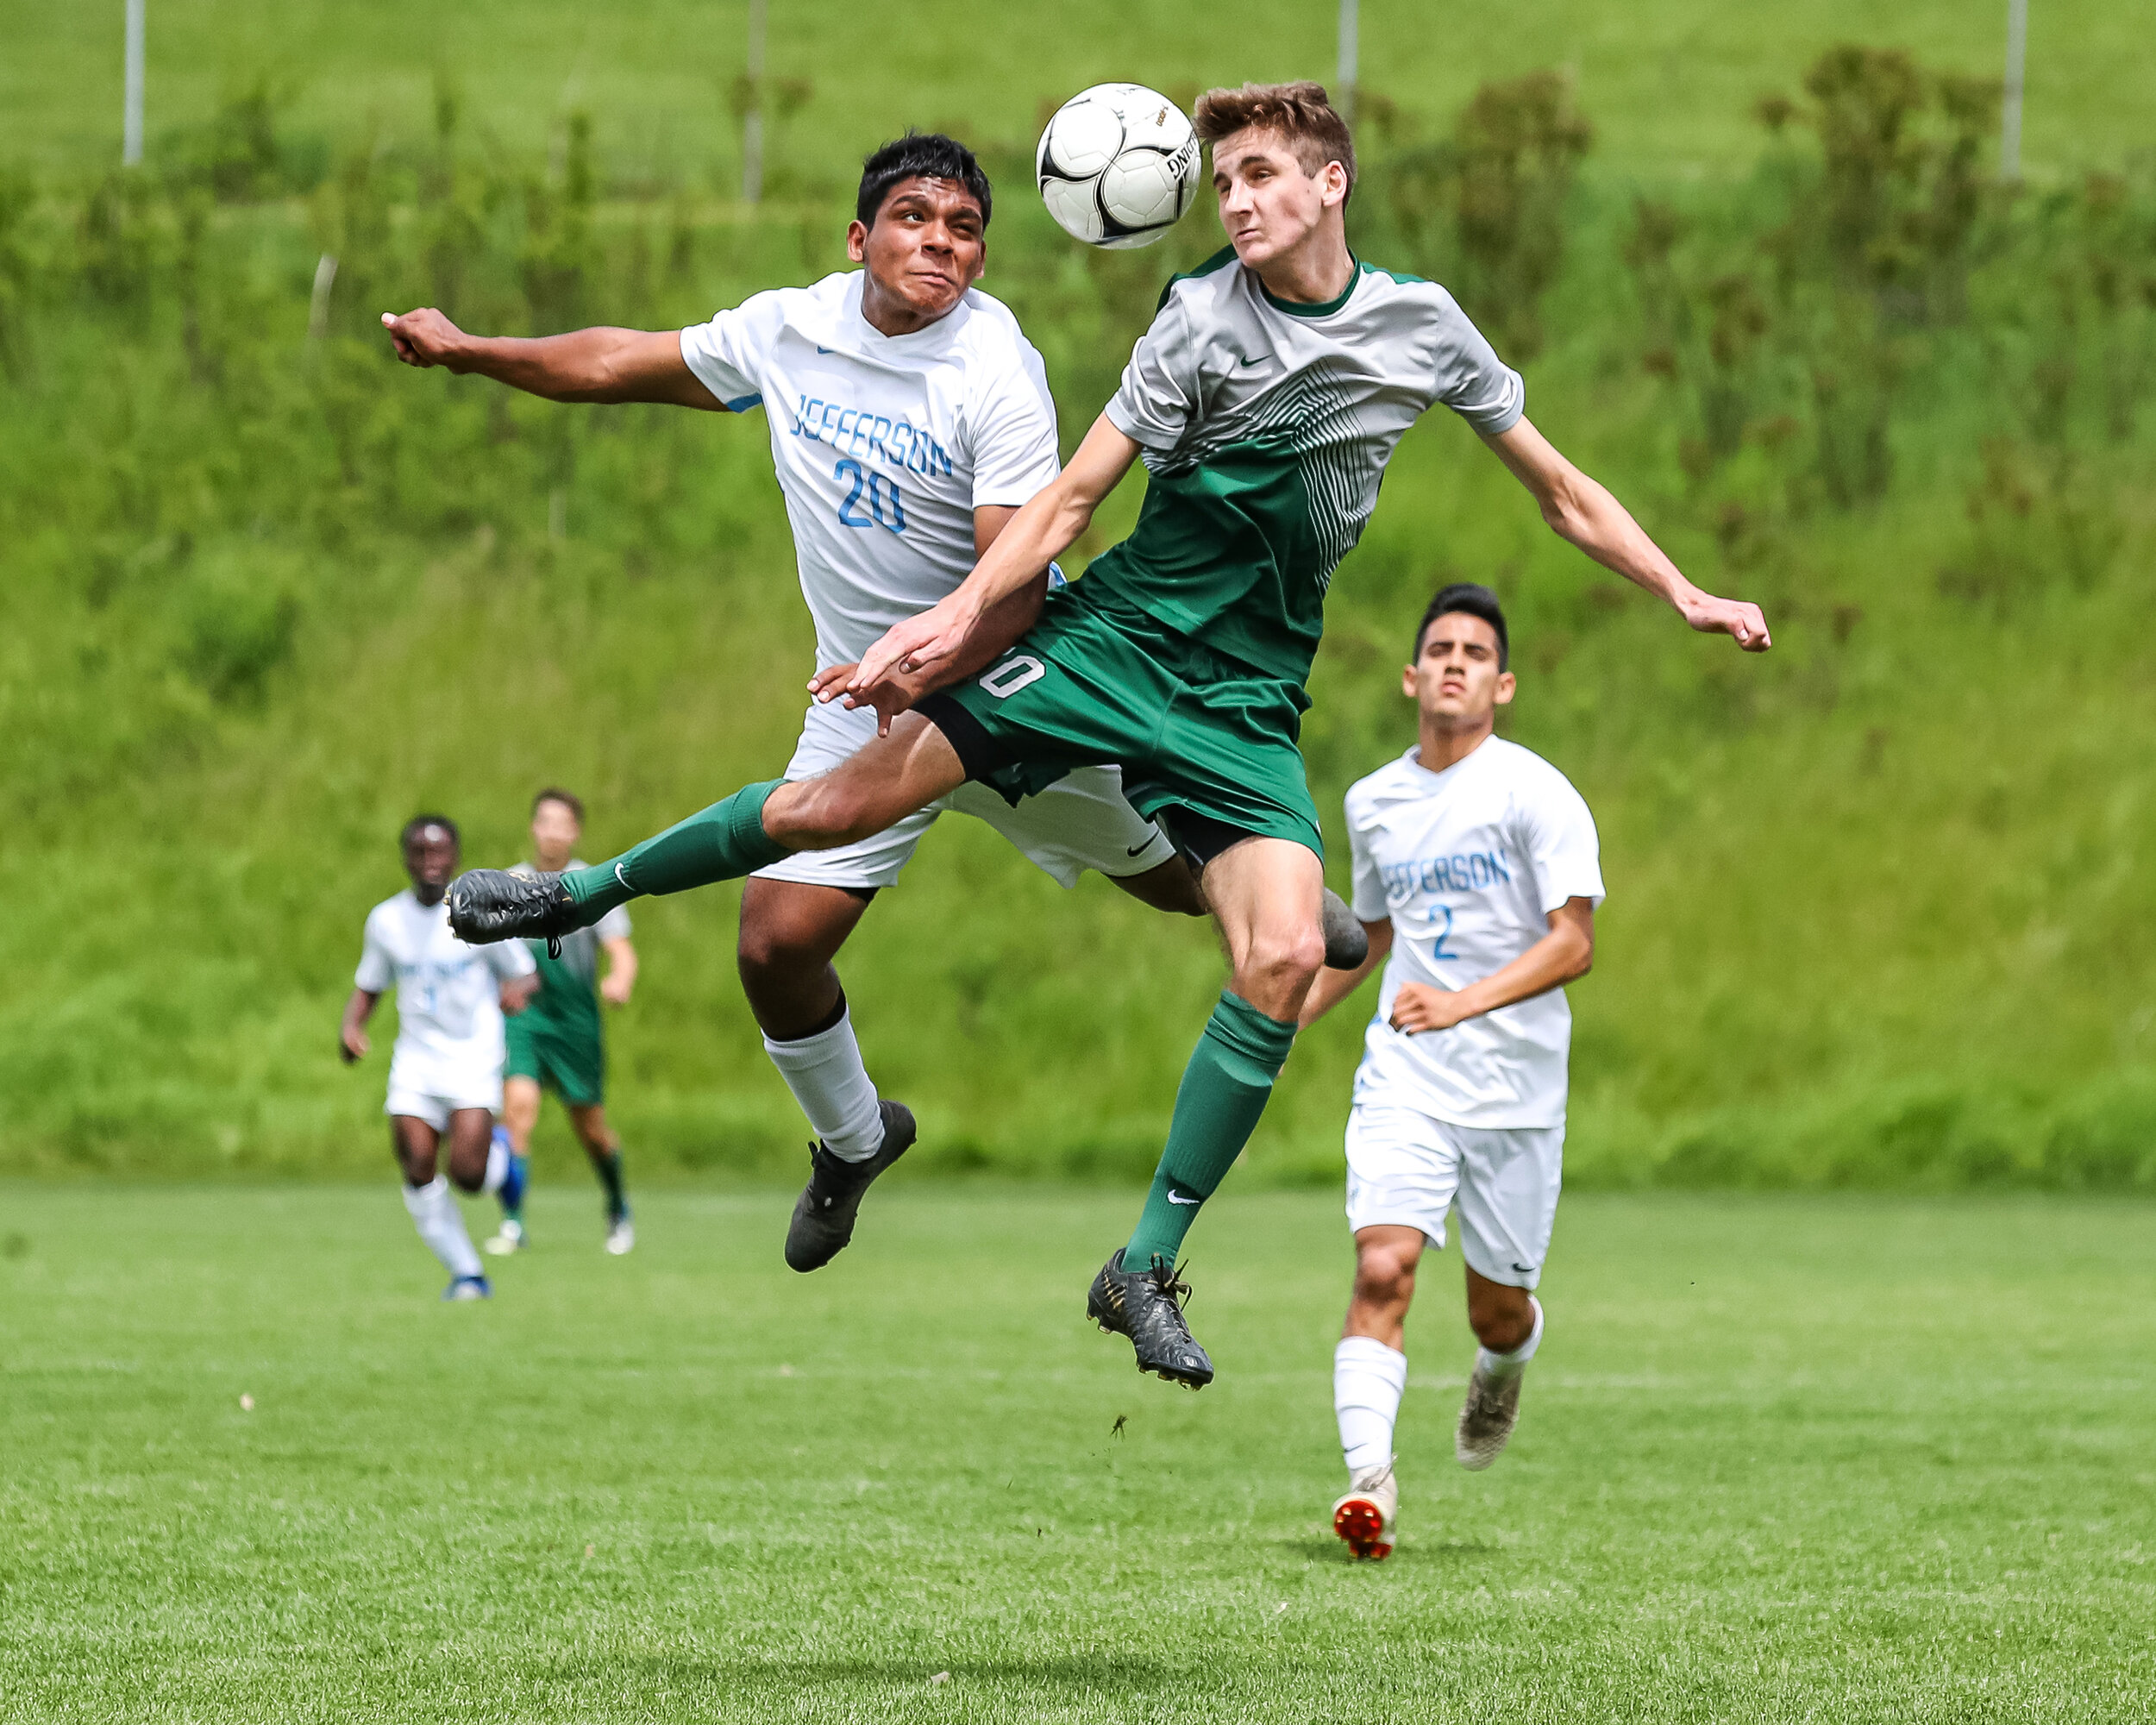  Cedar Rapids Jefferson’s Nestor Diaz (20) and Iowa City West’s Matthew McDonnell (10) battle for control of the ball during the boys soccer substate semifinal at Iowa City West High School in Iowa City on Saturday, May 25, 2019. 